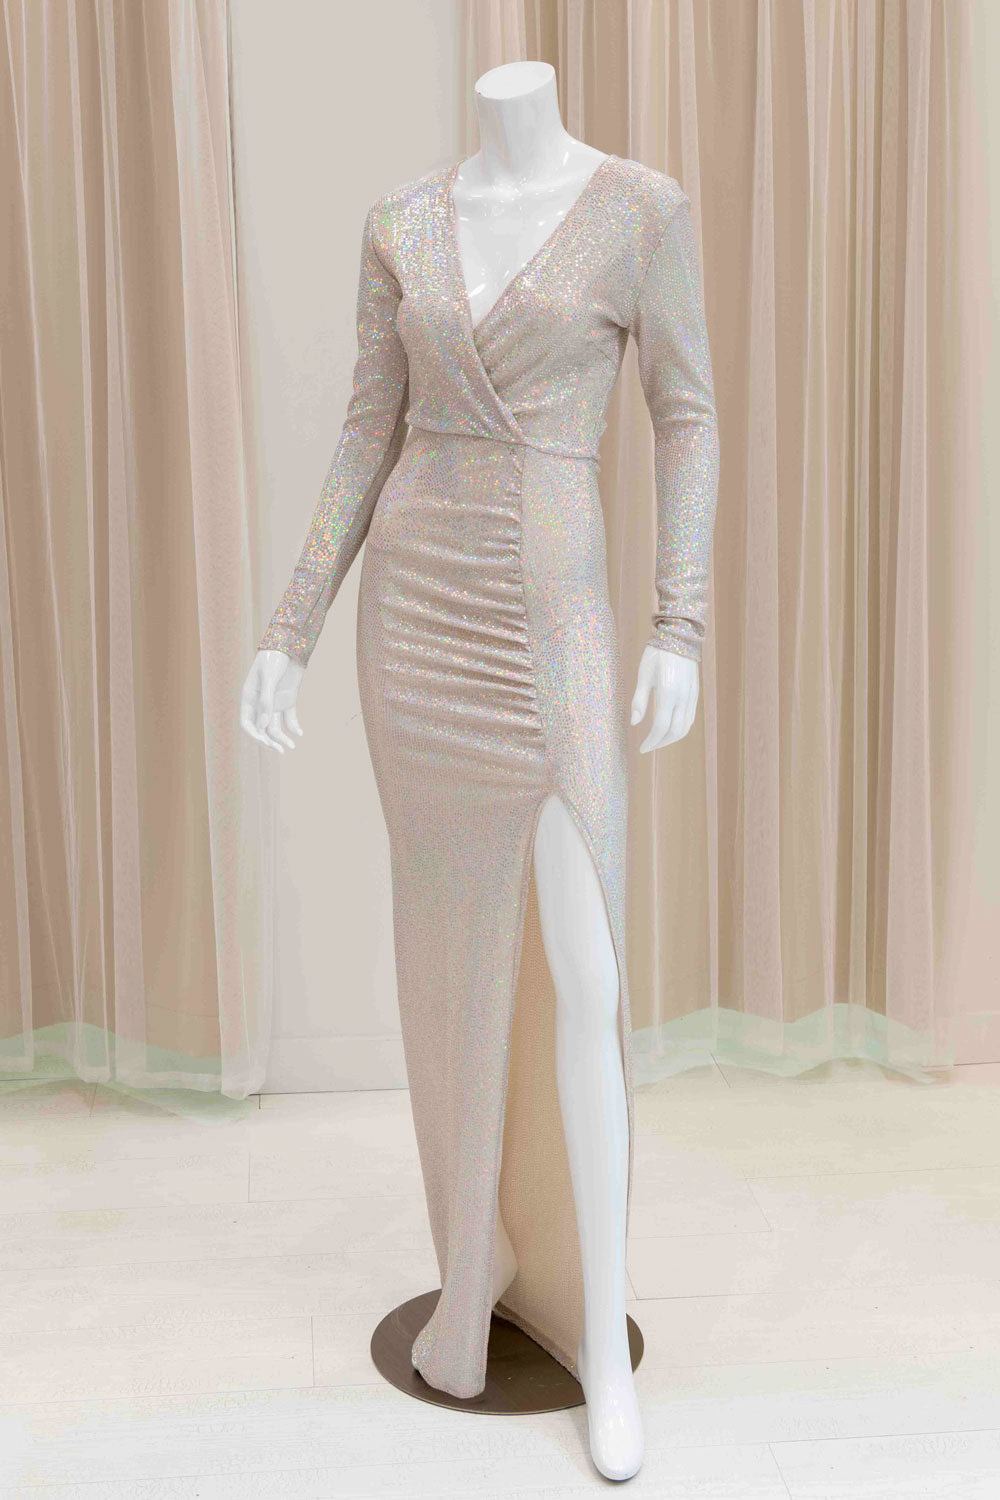 Nayomi Long Sleeve Evening Gown in Iridescent White